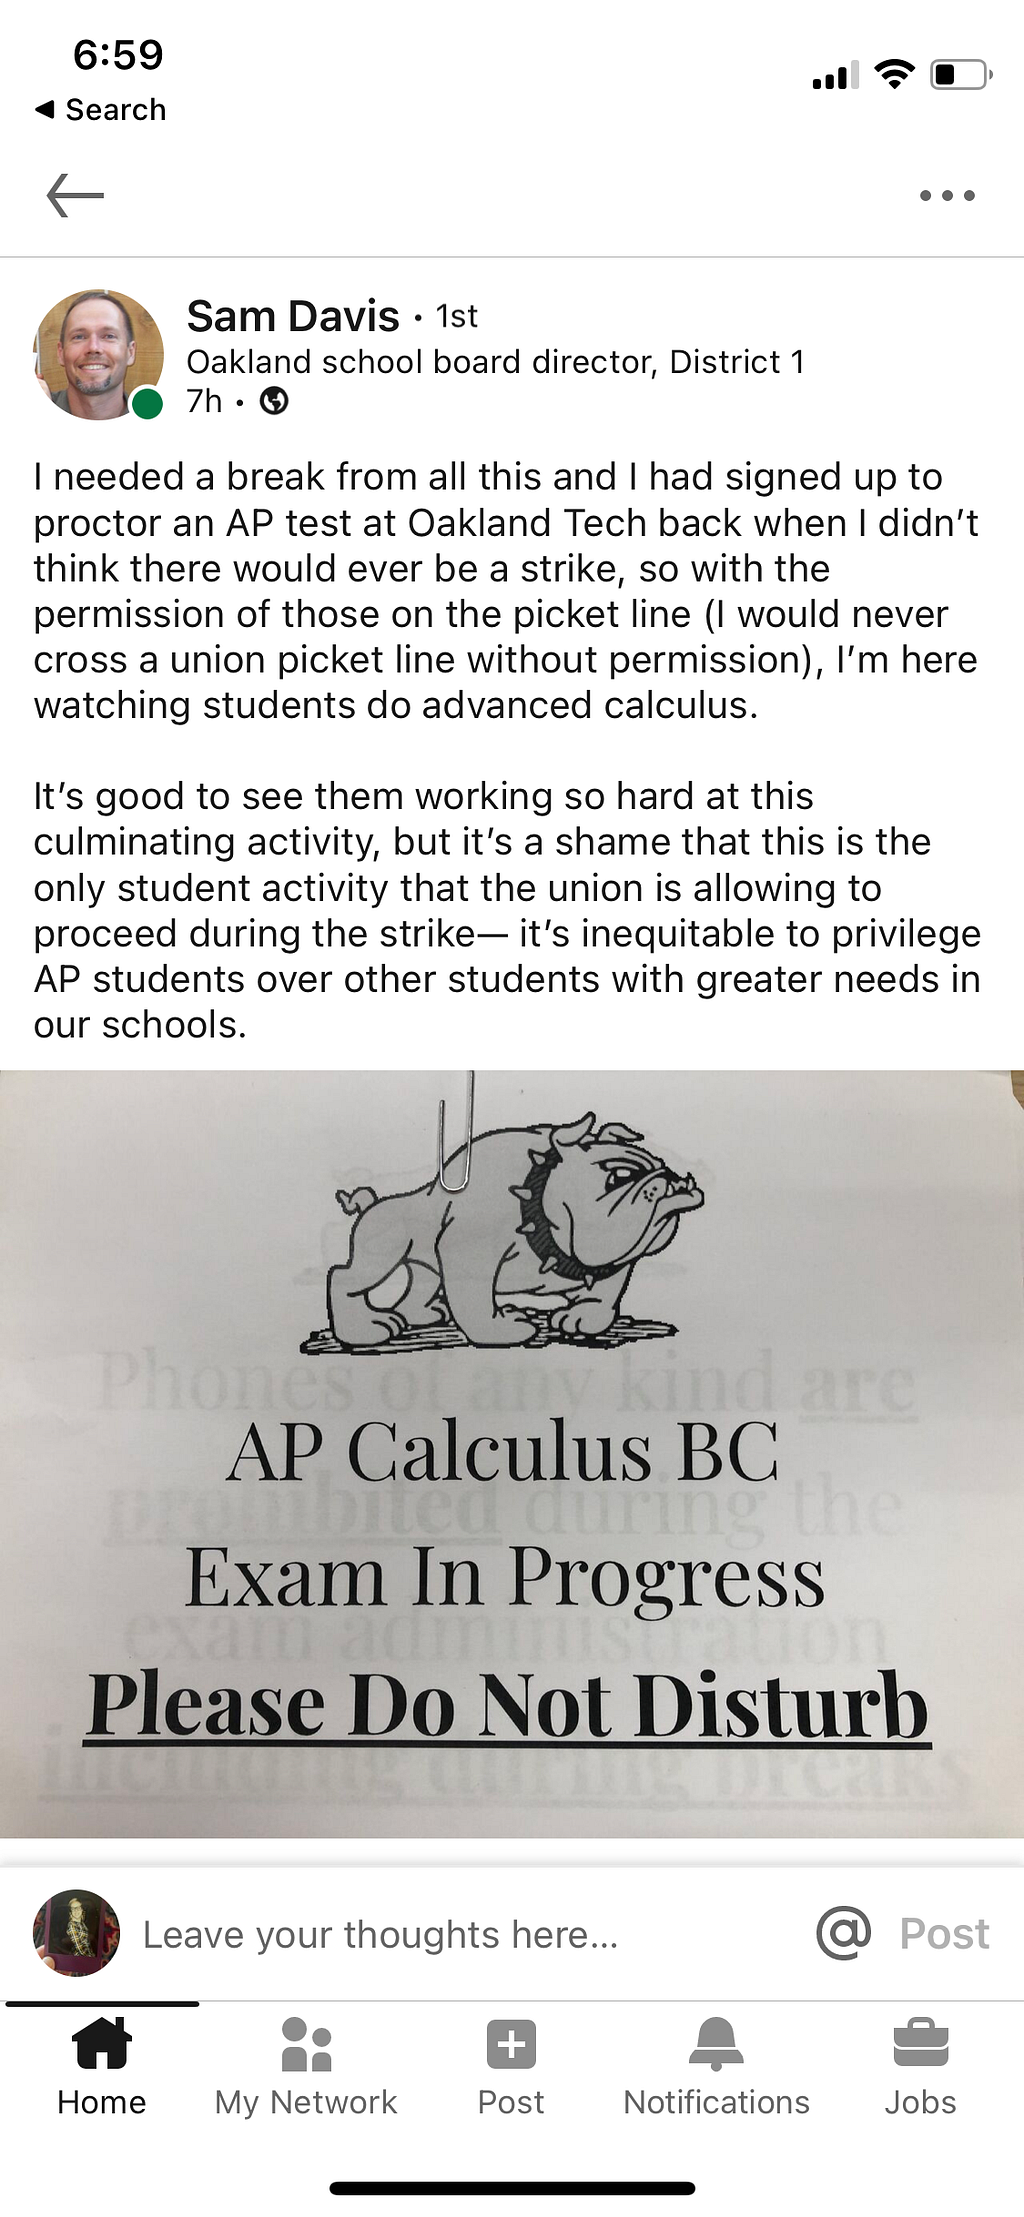 Screenshot of a LinkedIn post by Sam Davis, Oakland school board director, with a photo of a black and white sign with Oakland Tech’s mascot, a bulldog, that says “AP Calculus BC, Exam in Progress, Please Do Not Disturb.” Text of post in caption.